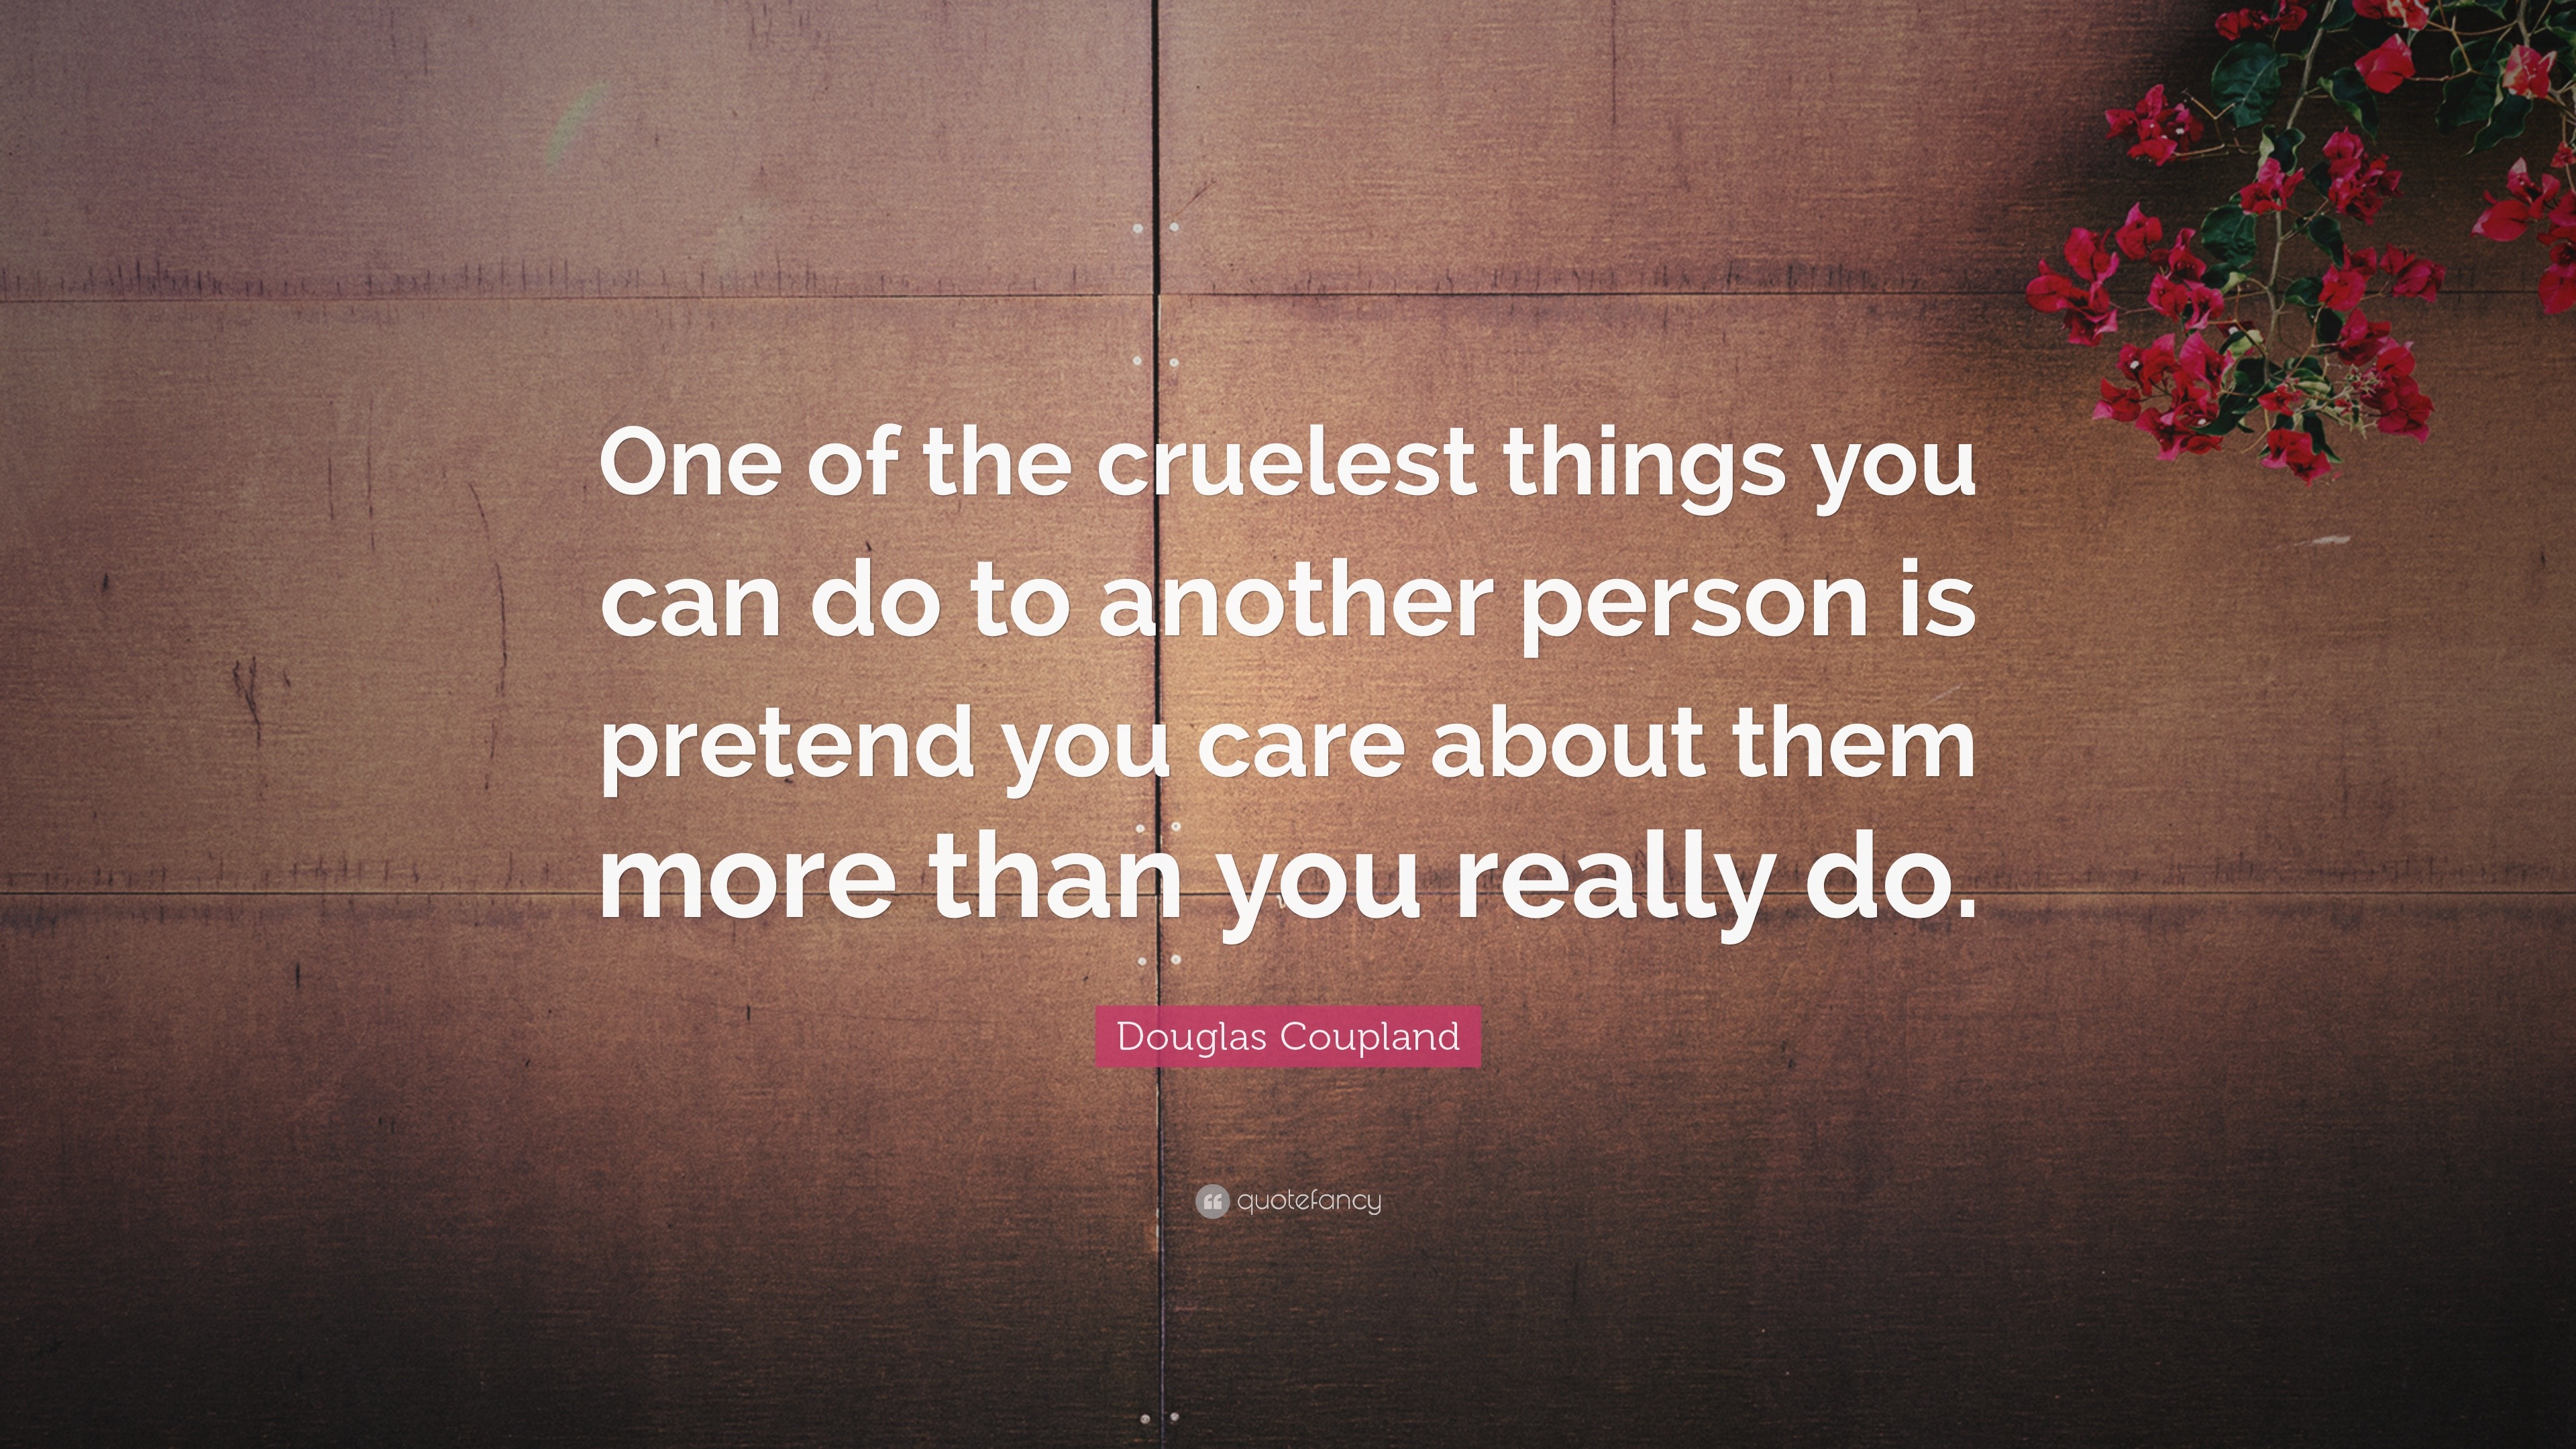 Relationship Quotes “ e of the cruelest things you can do to another person is